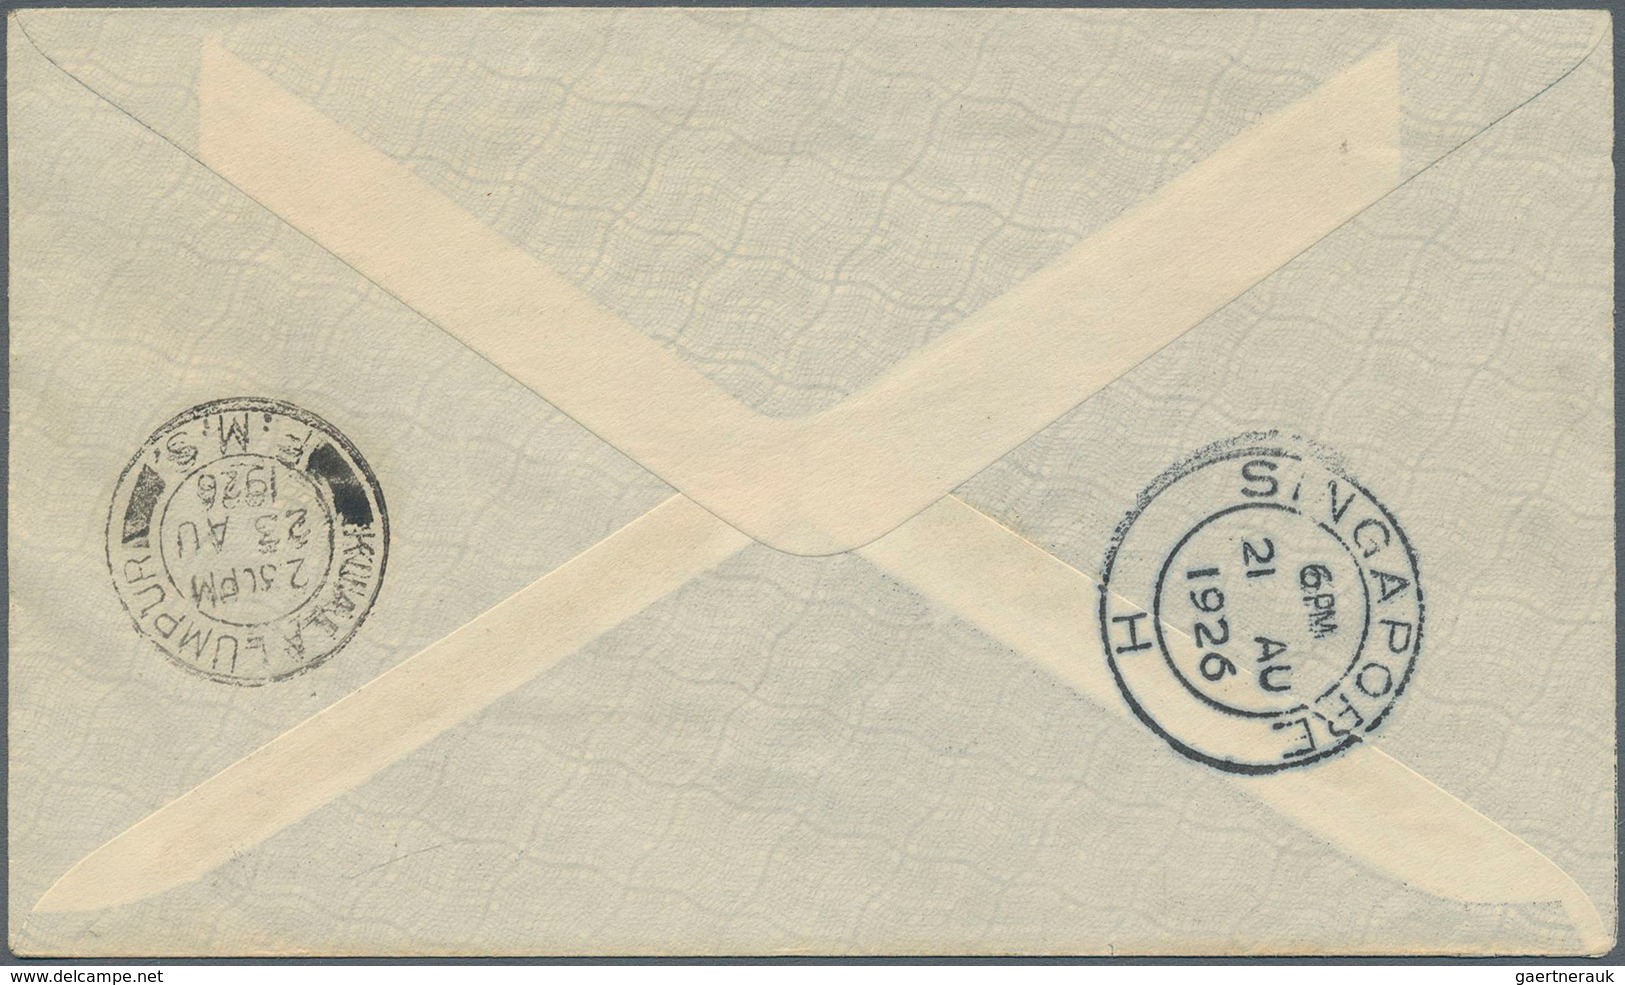 05387 Malaiische Staaten - Straits Settlements: 1926 Early Singapore-Kuala Lumpur Airmail Cover Franked KG - Straits Settlements